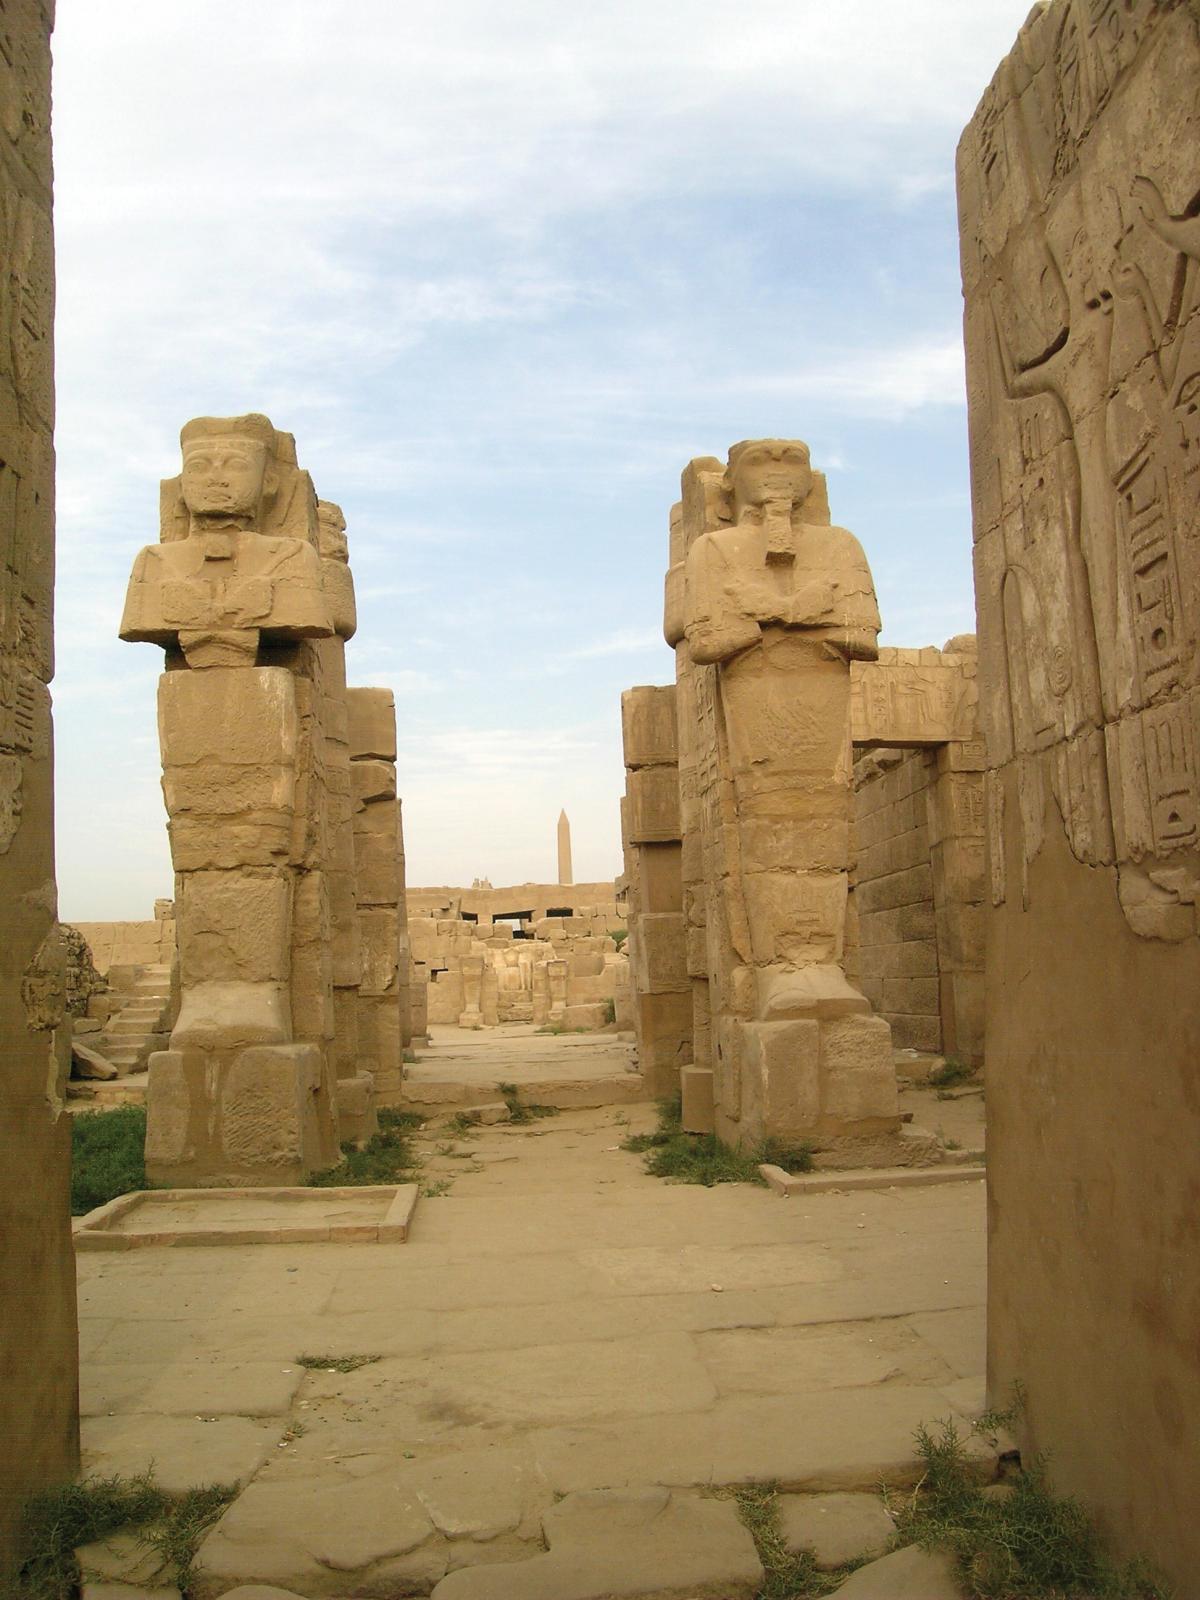 Huge sandstone statues of rulers and gods flank the entrance to a temple, also made of yellow sandstone